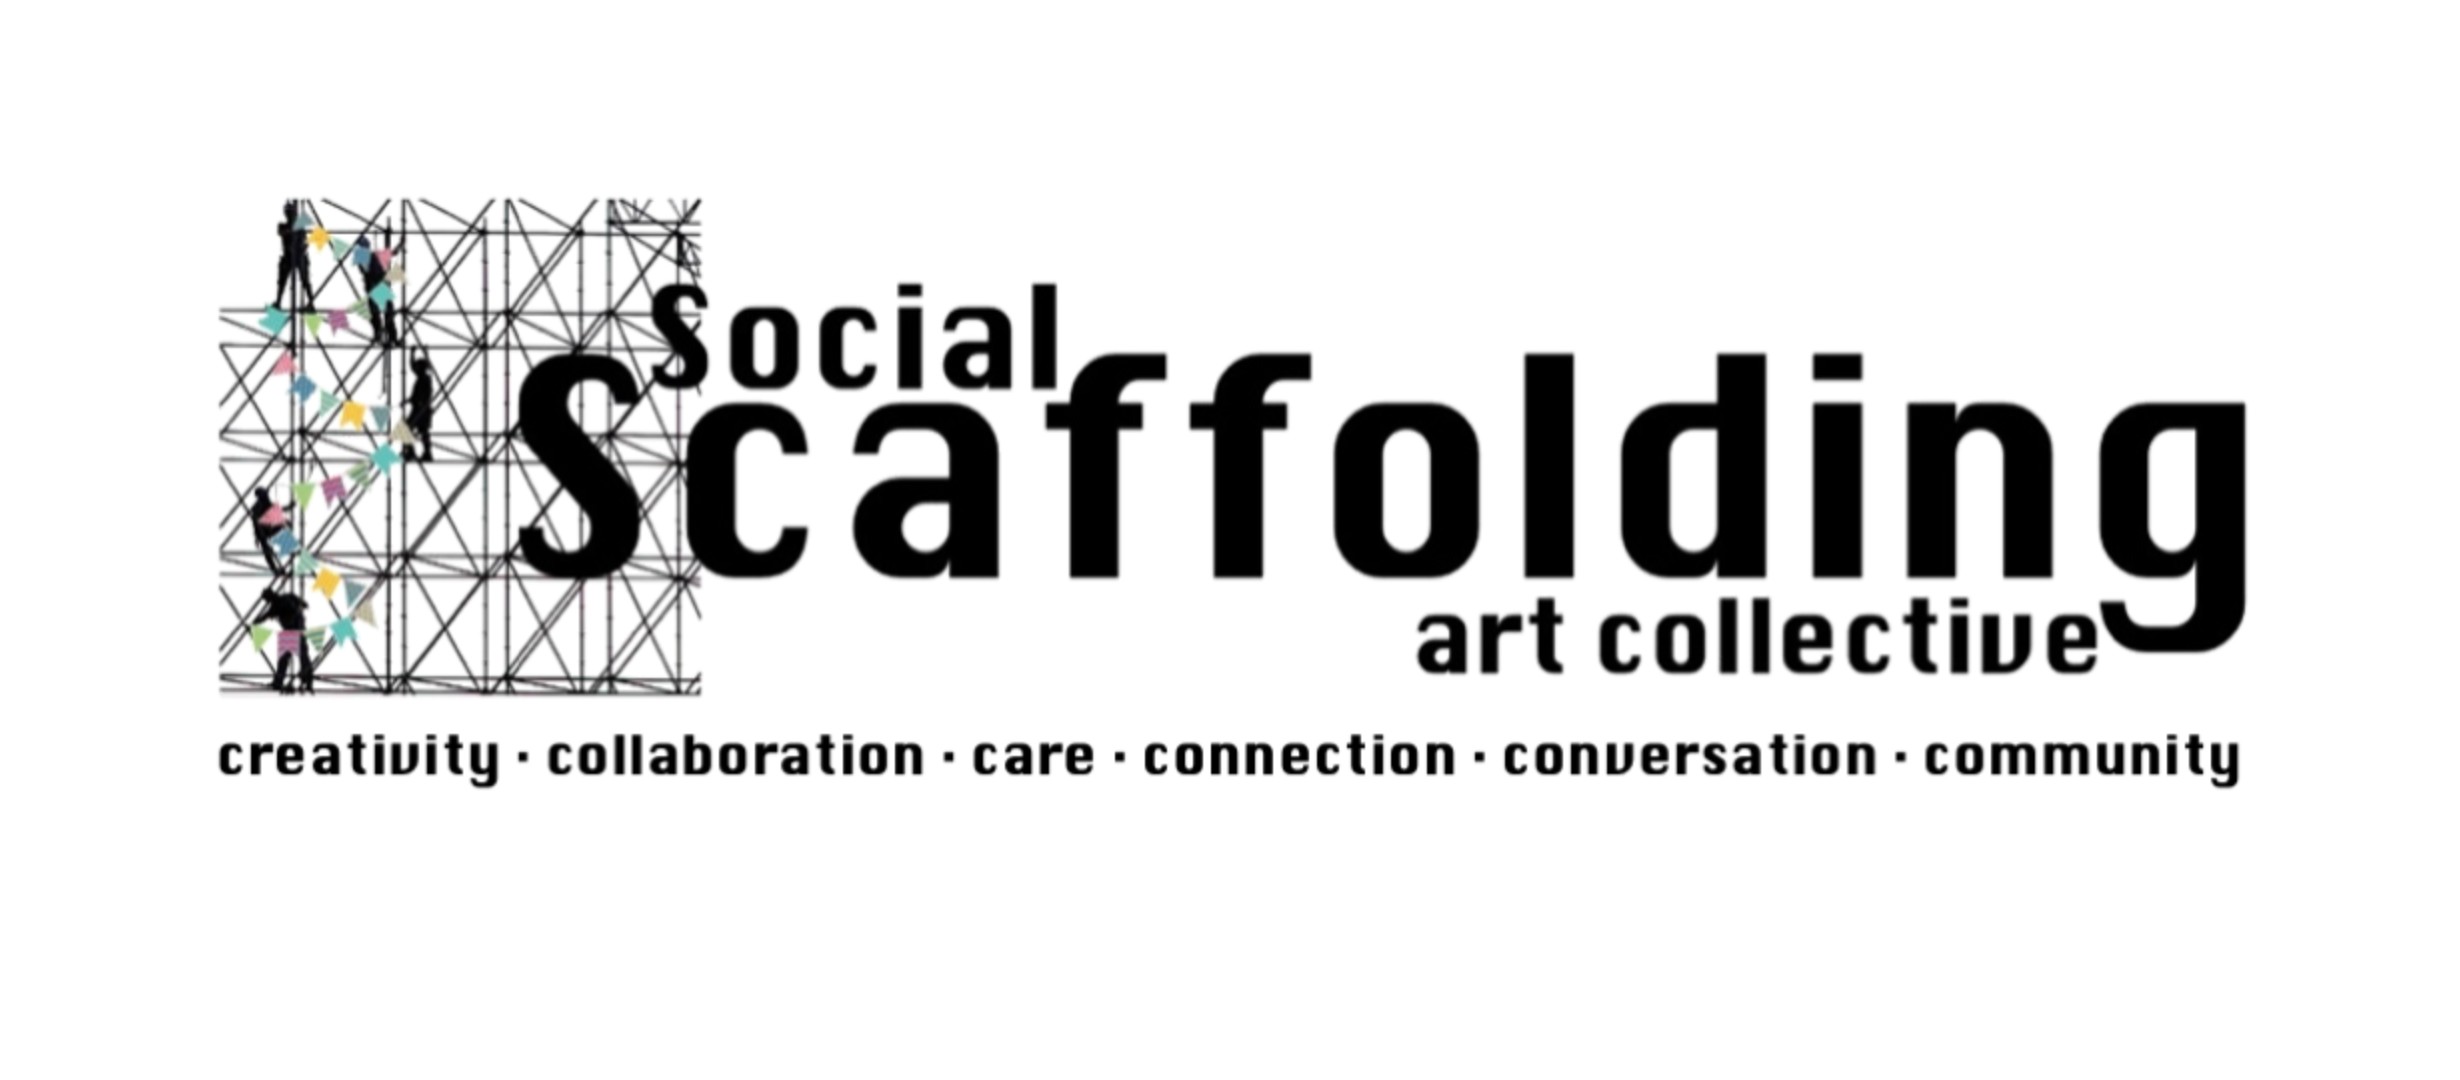 Social Scaffolding Art Collective logo with black text and graphic of people hanging bunting on scaffolding: underneath text reads creativity, collaboration, care, connection, conversation, community